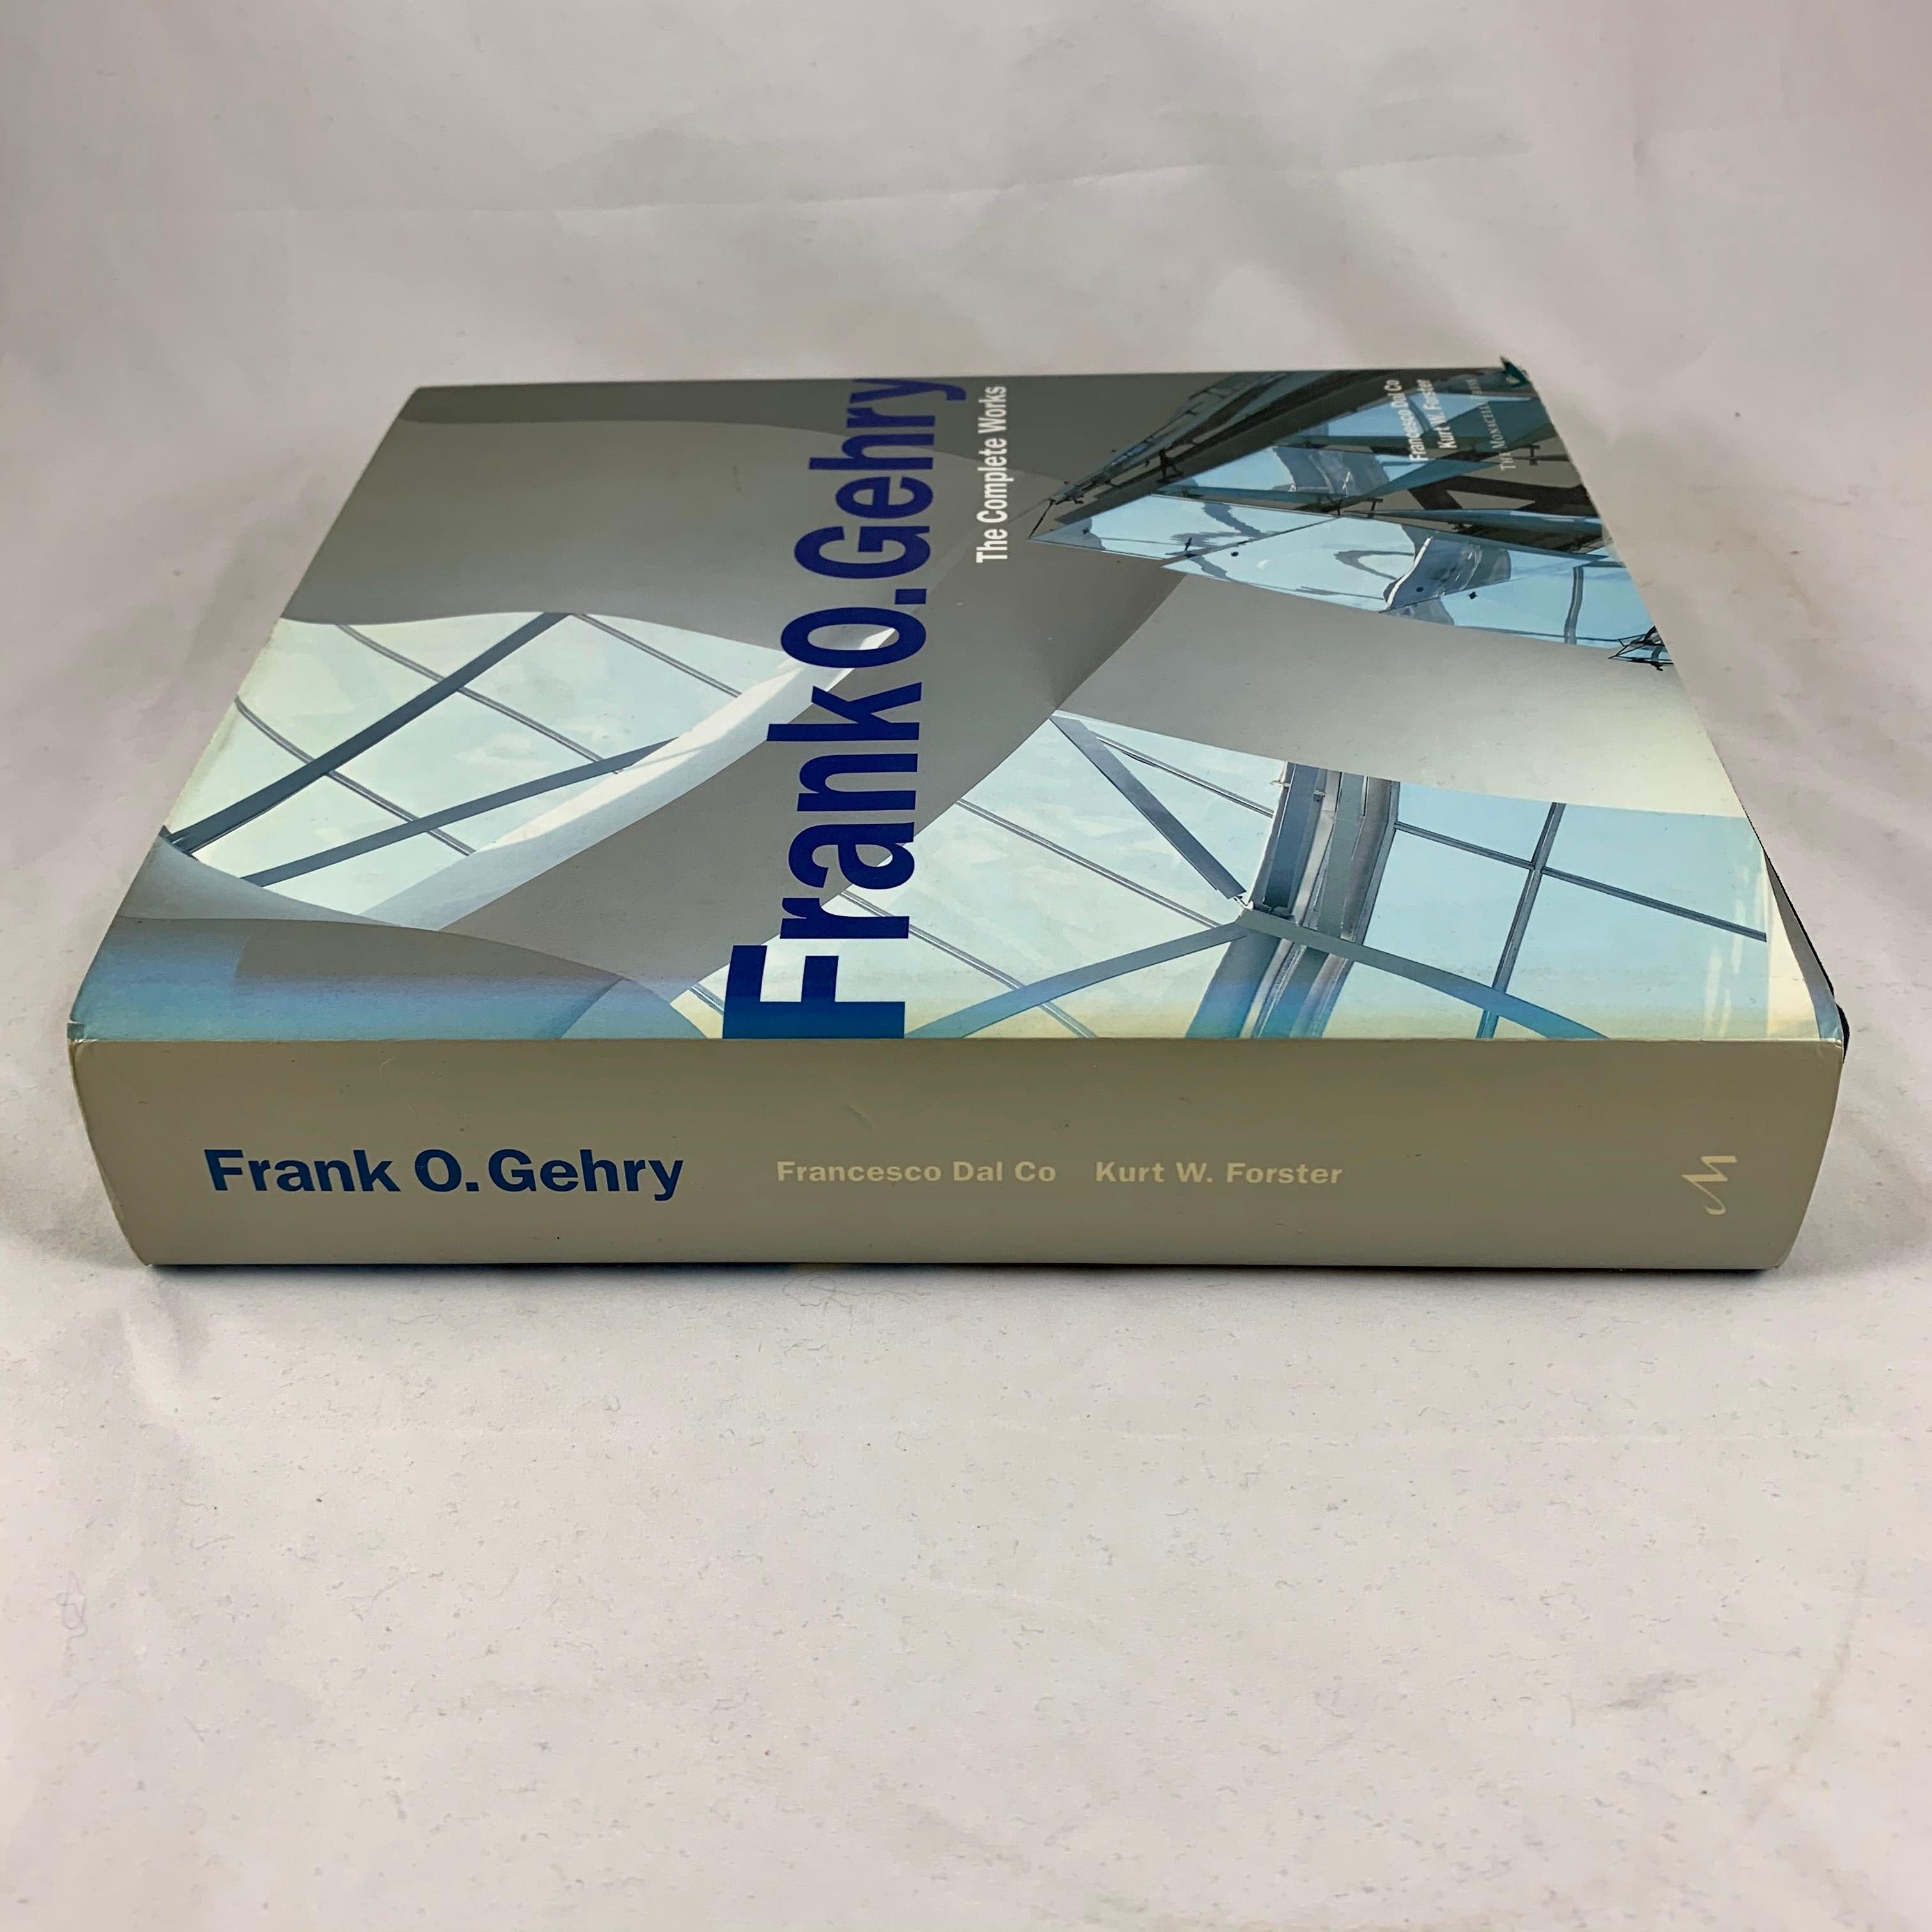 One of the world’s great architects, Frank O. Gehry has produced an astonishing body of work. With the artistry of a sculptor and the brilliant articulation of an engineer, Gehry creates constructions that defy categorization.

Over three hundred